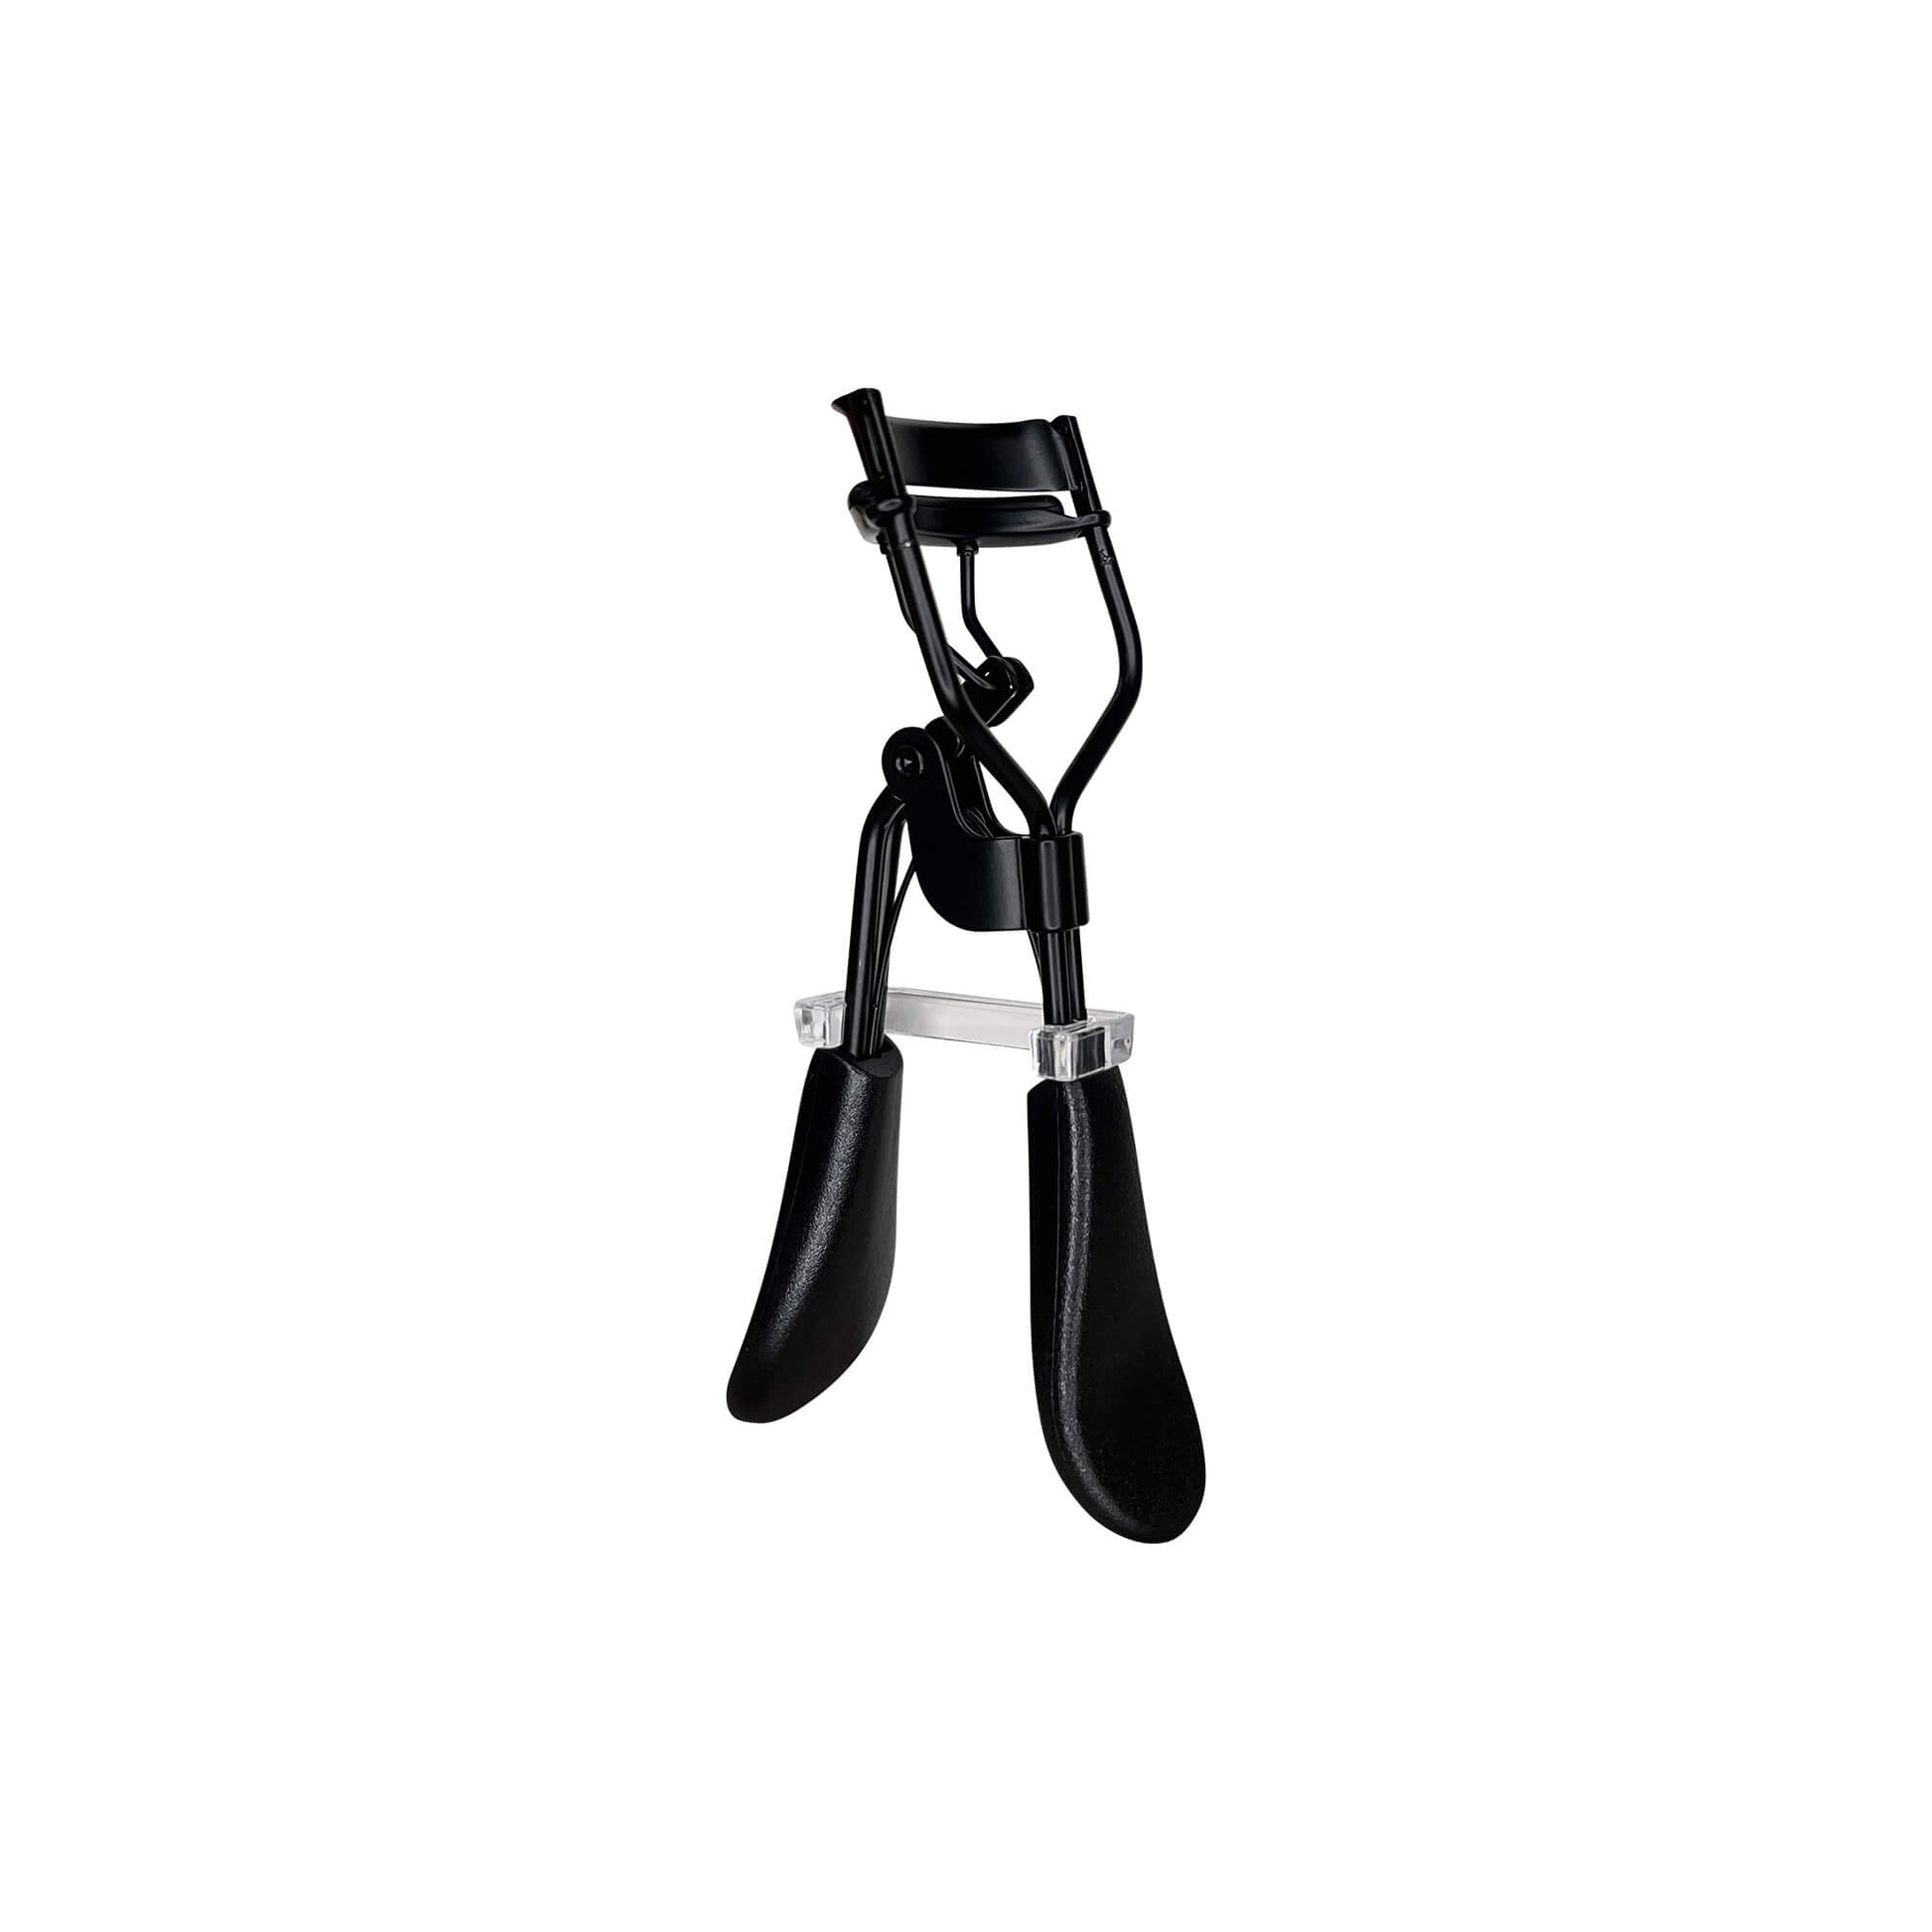 Curl those lashes like a pro with our Cruisin Organics padded eyelash curler! The padded handles and silicone pad provide the perfect amount of pressure for a long-lasting curl, while the curved and wide mouth accommodates all eye shapes. Pair with your favorite mascara for that dramatic flair!